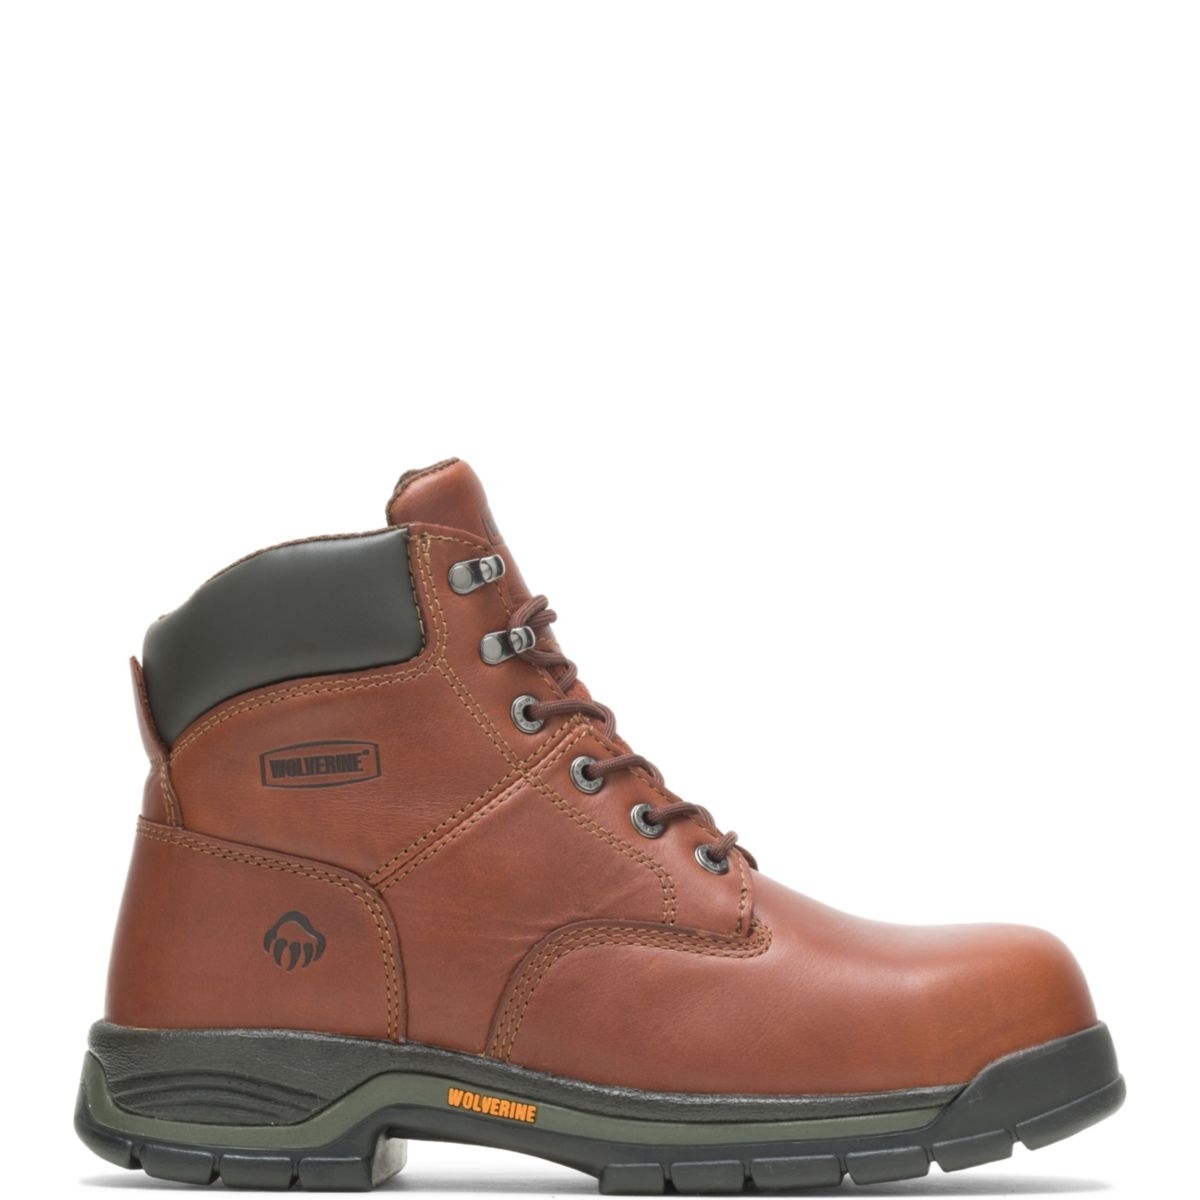 WOLVERINE Men's Harrison 6 Lace-Up SoftToe Work Boot Brown - W04906 Varies BROWN - BROWN, 7